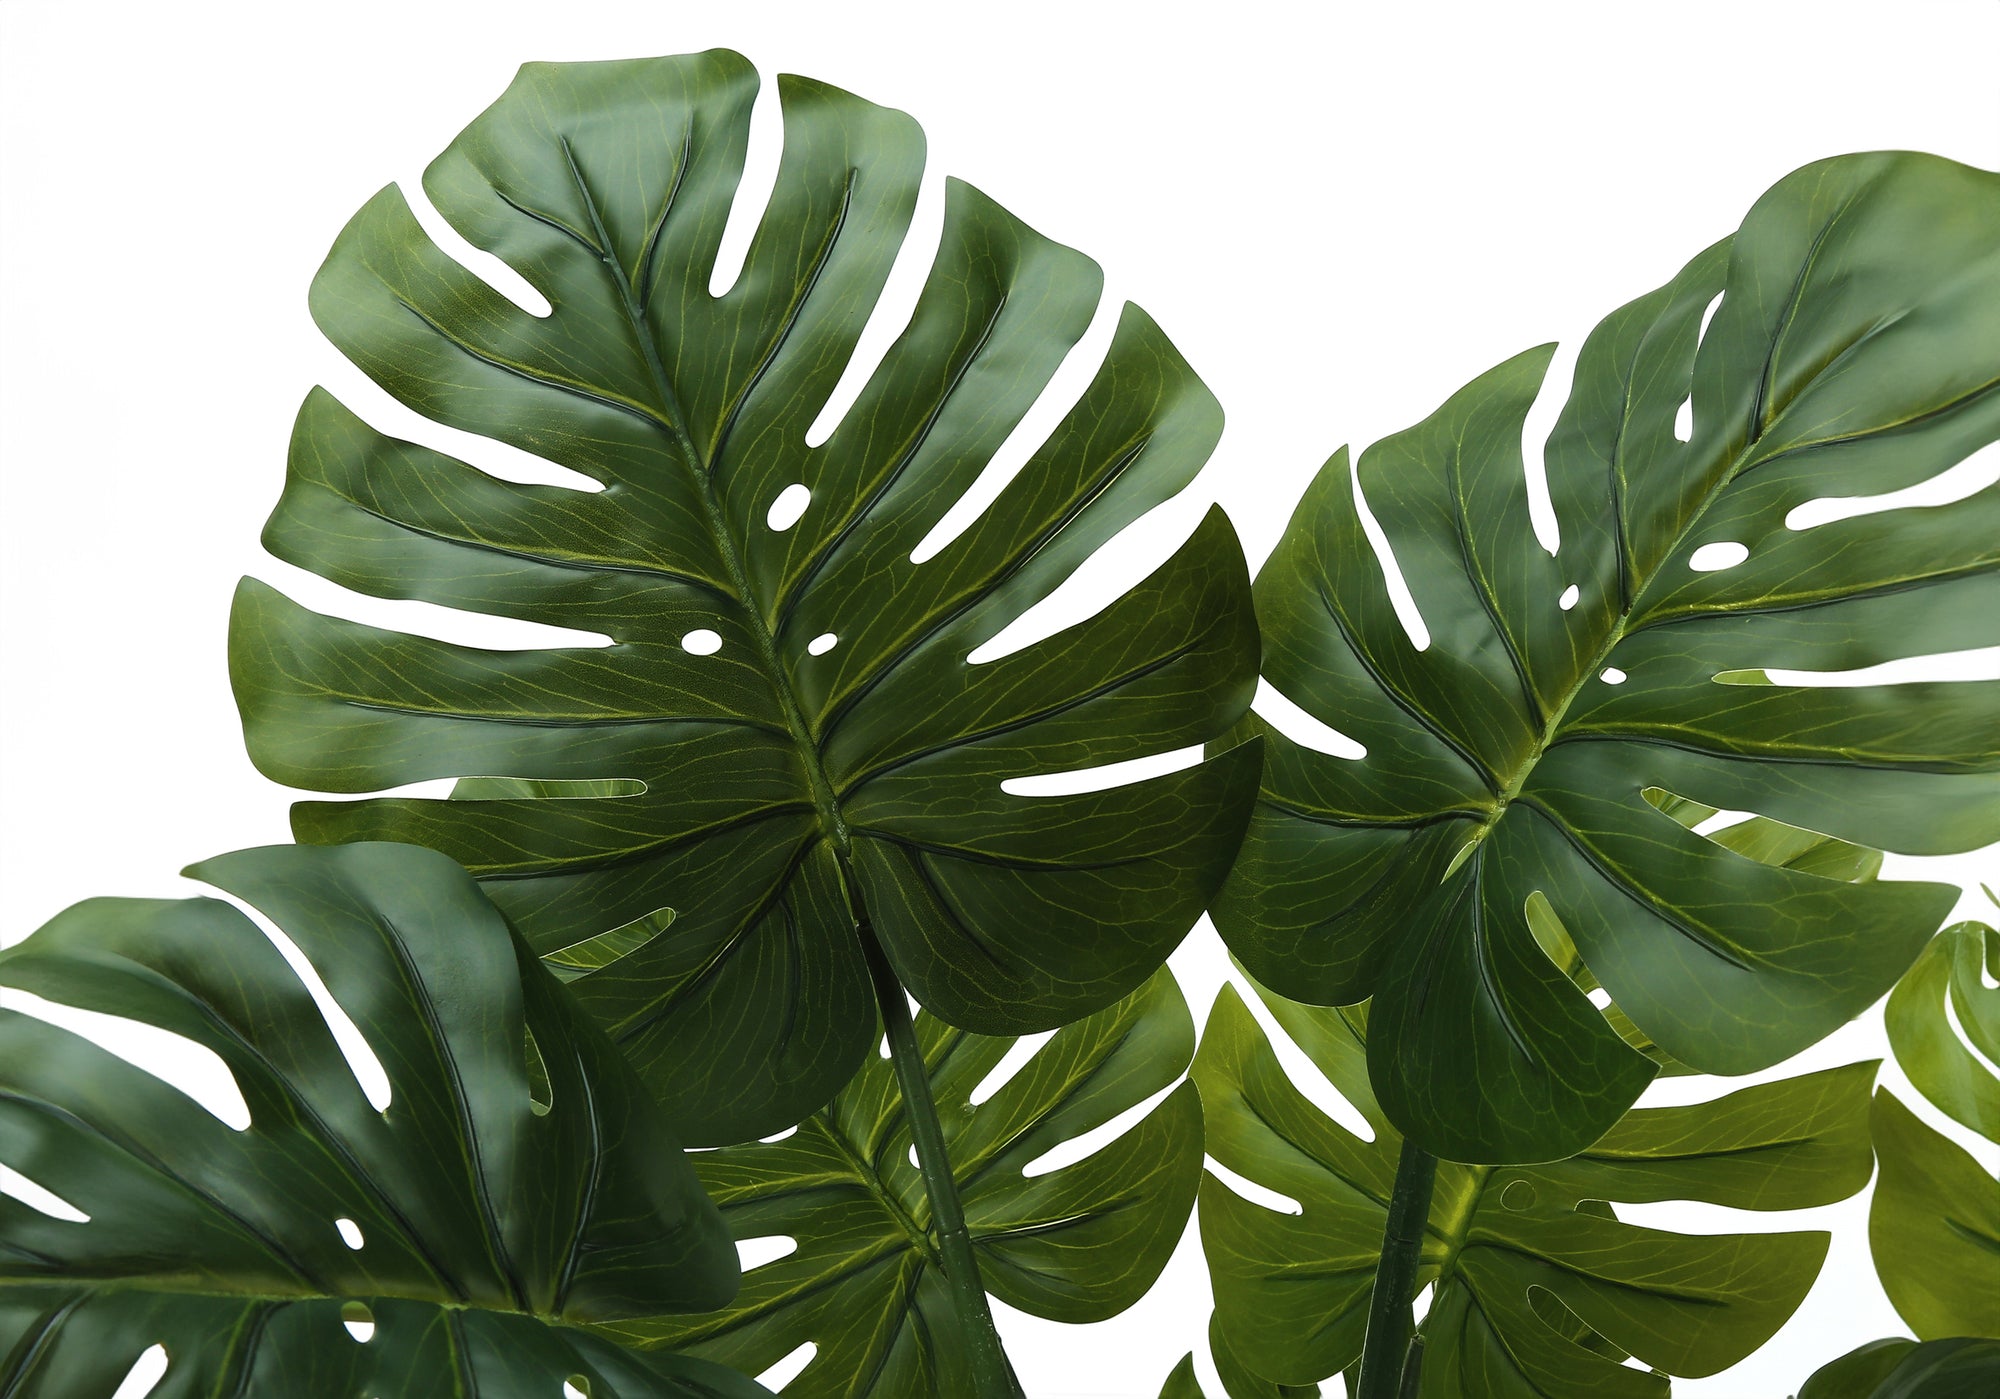 MN-319510    Artificial Plant, 45" Tall, Monstera Tree, Indoor, Faux, Fake, Floor, Greenery, Potted, Real Touch, Decorative, Green Leaves, Black Pot